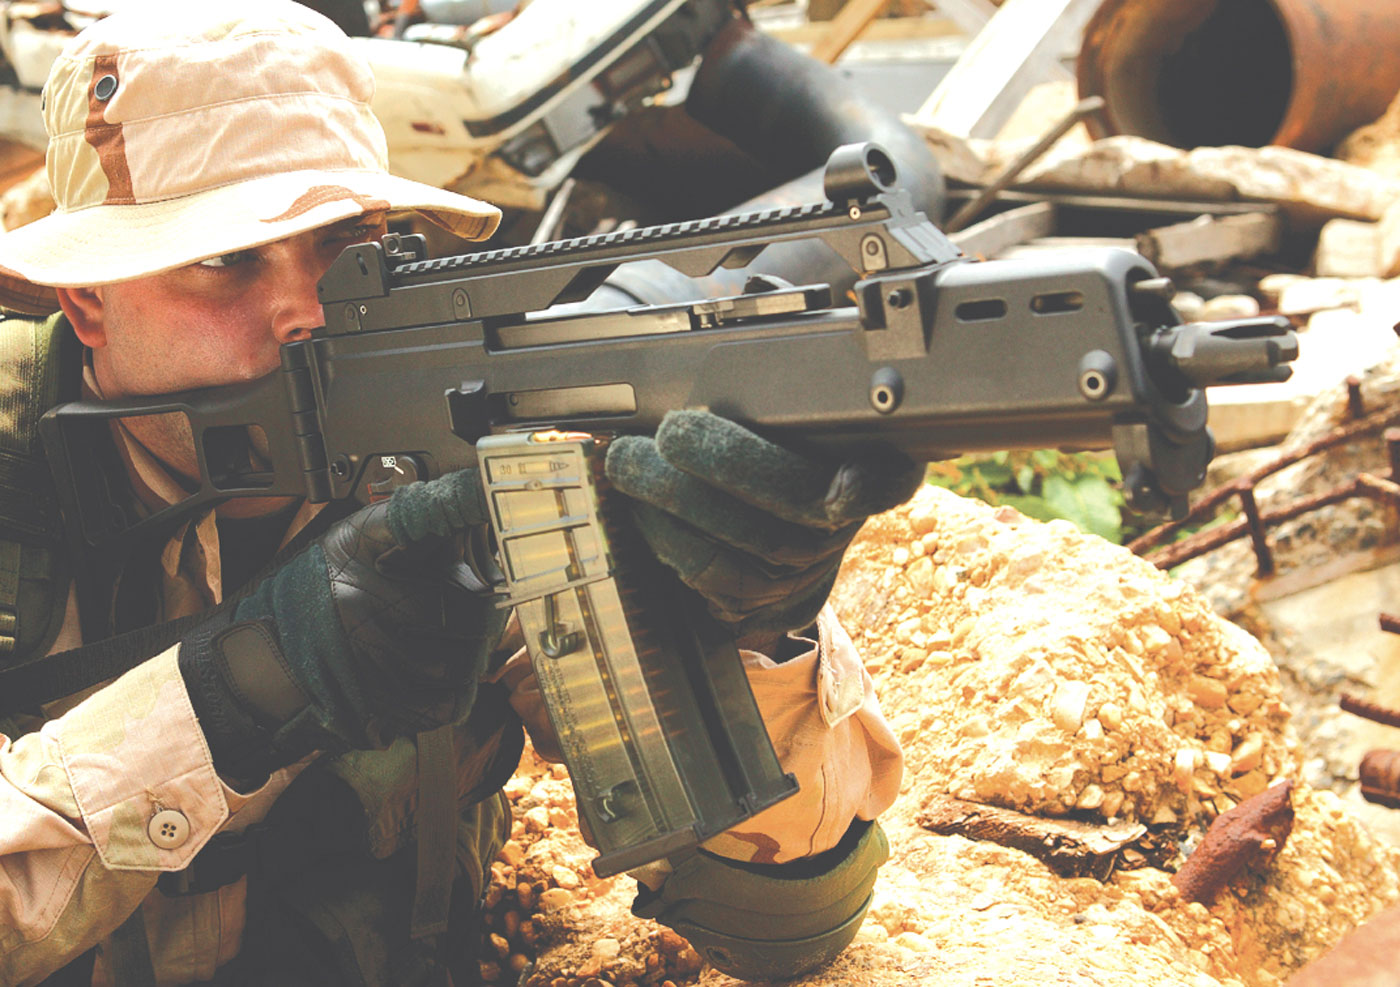 The submachine gun brings compactness and a high firing rate to the close quarters battle. Heckler & Koch’s G36C replicates its G36 Assault Service Rifle in 9mm calibre for a rugged and reliable SMG for military and special force use. (H&K)